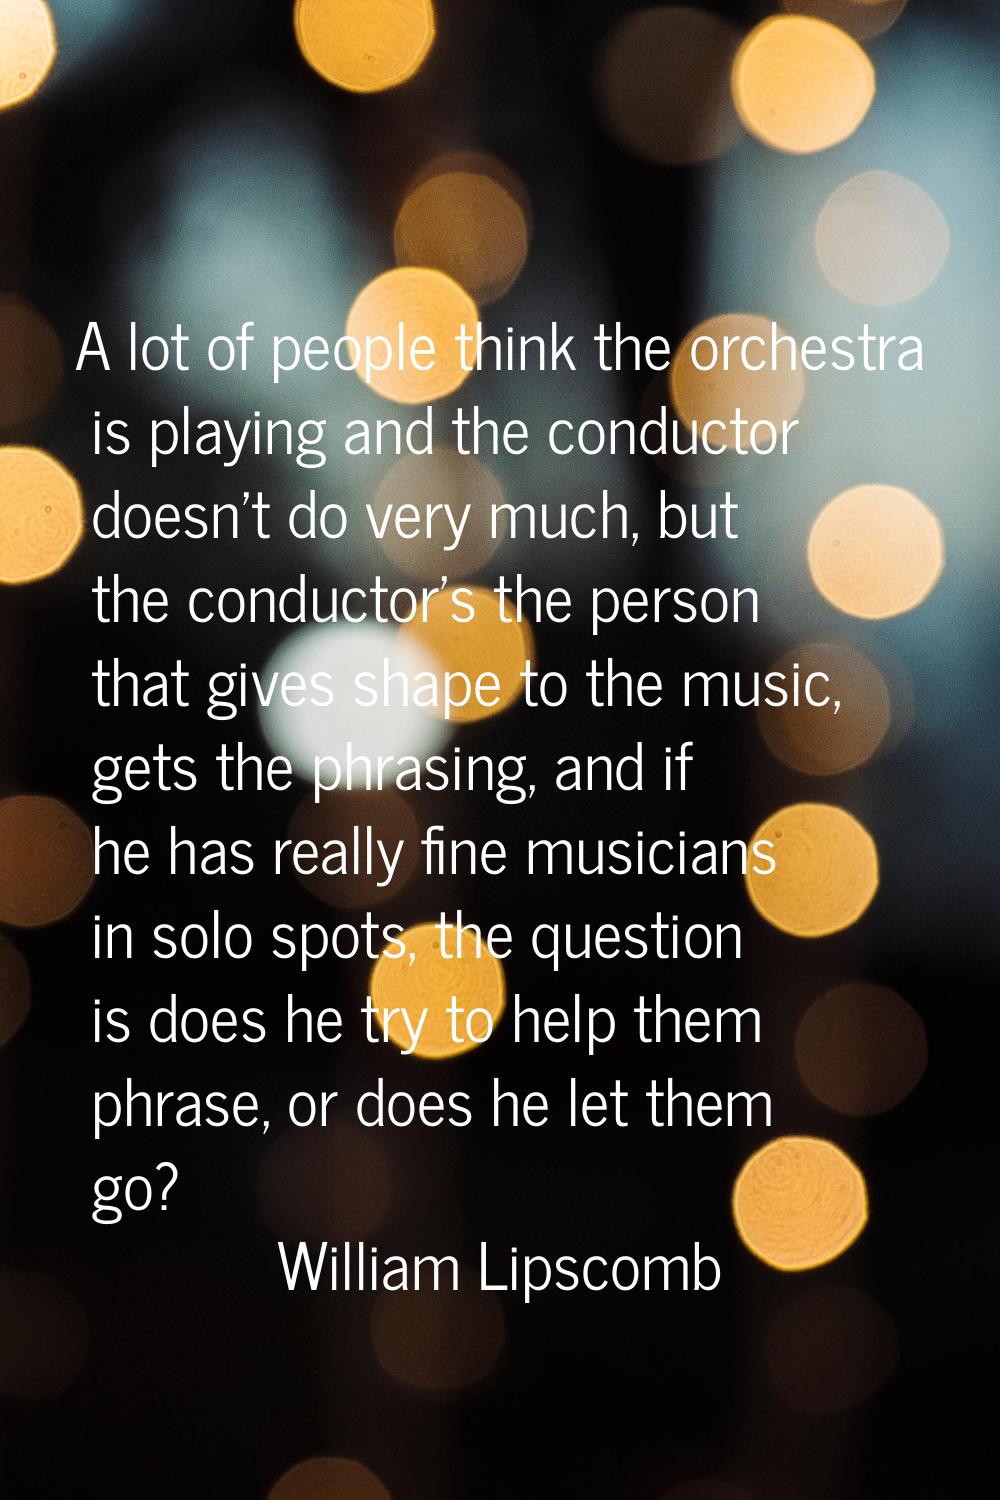 A lot of people think the orchestra is playing and the conductor doesn't do very much, but the cond